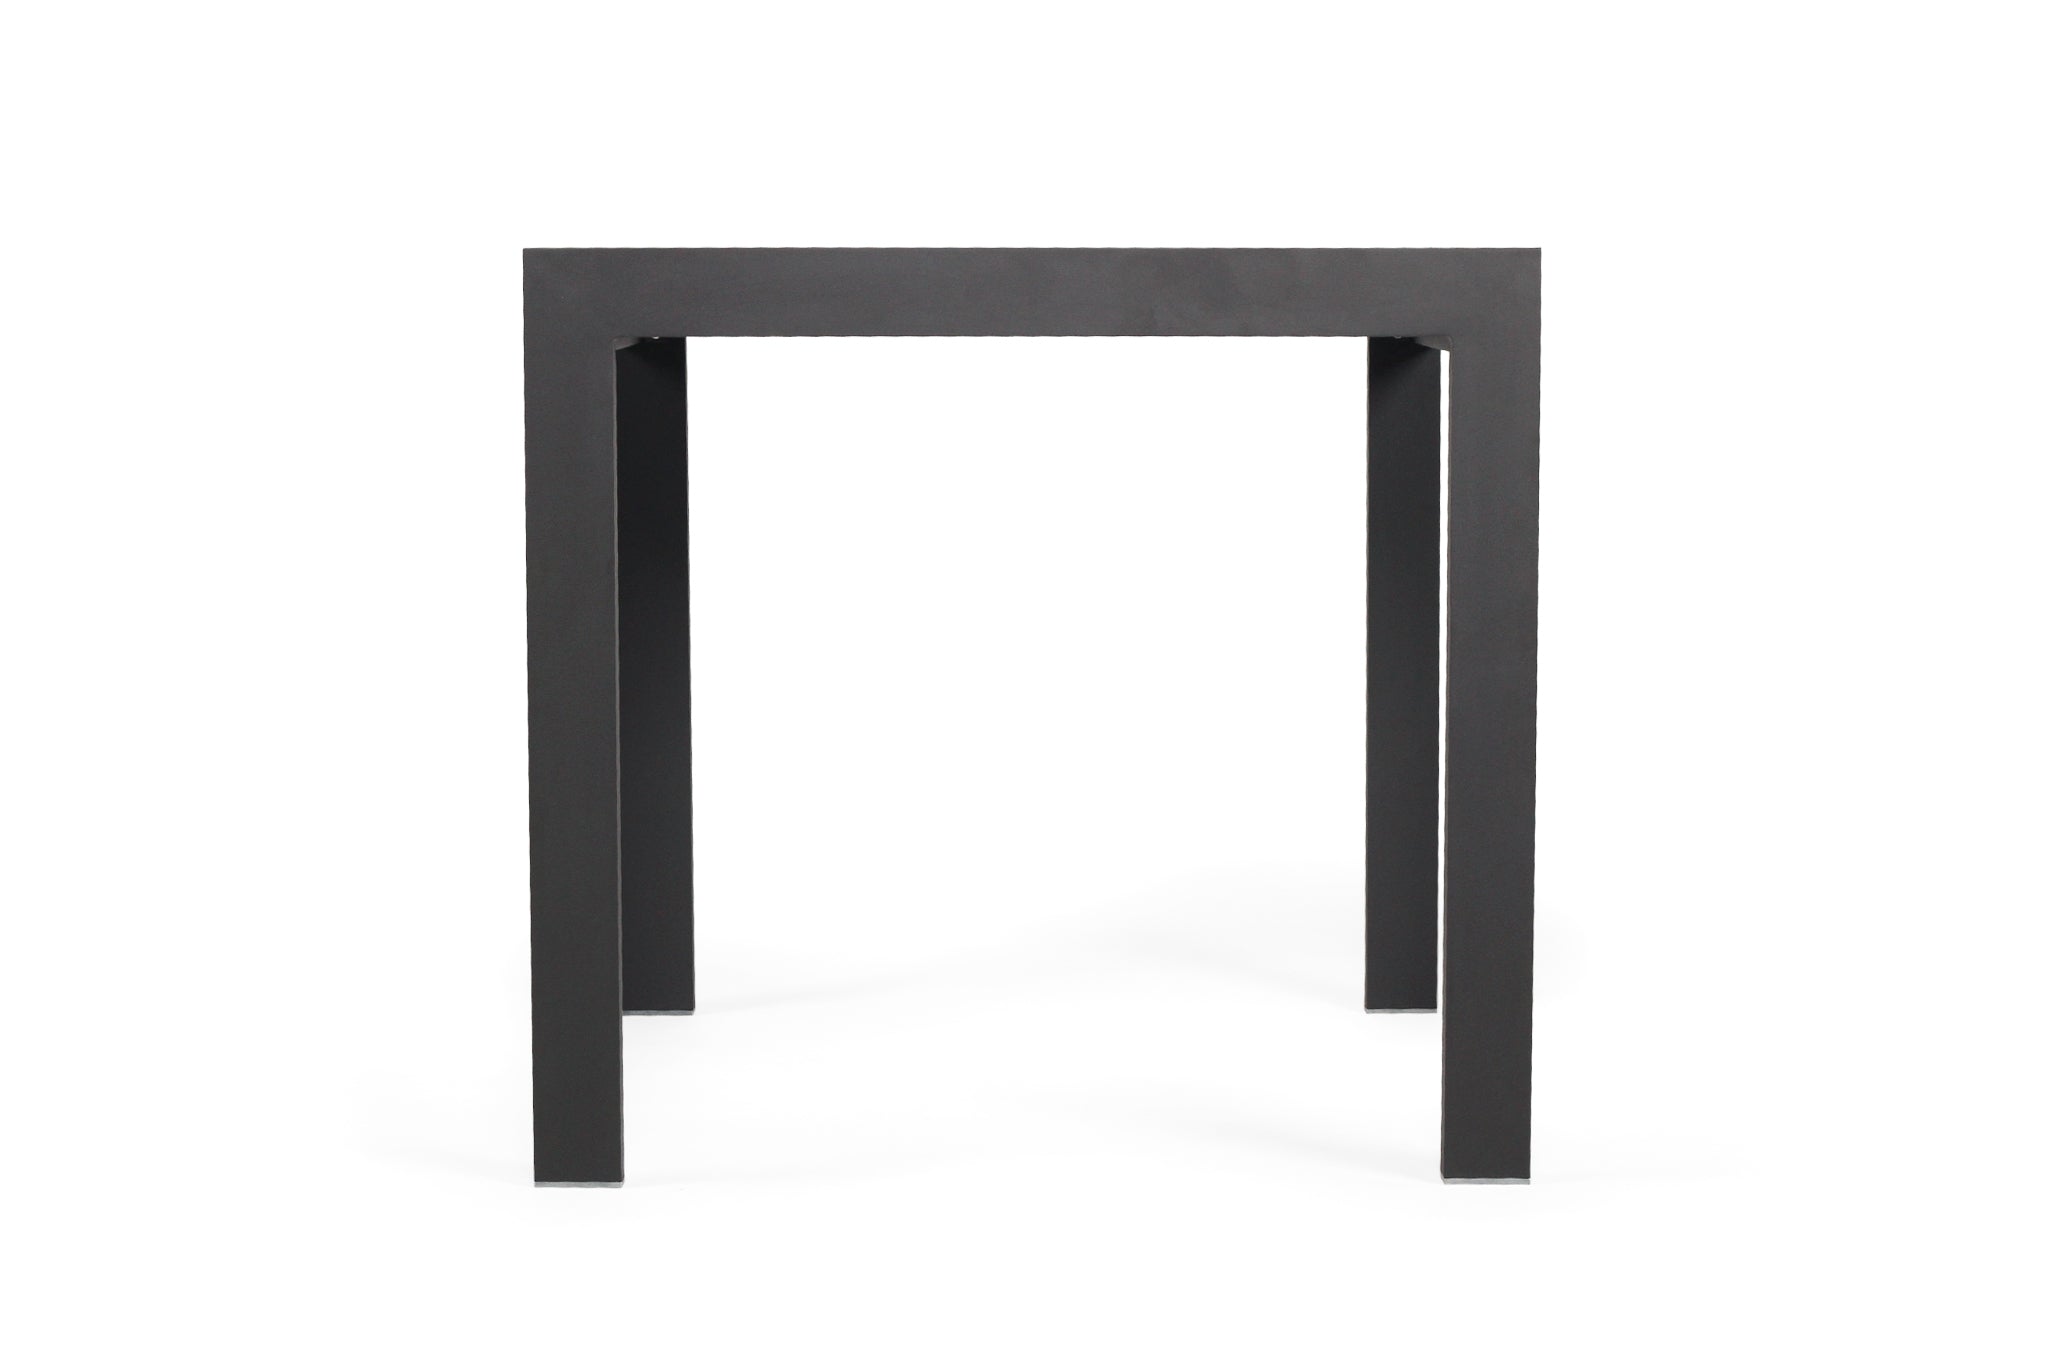 Randy Outdoor Dining Table 80cm – Black